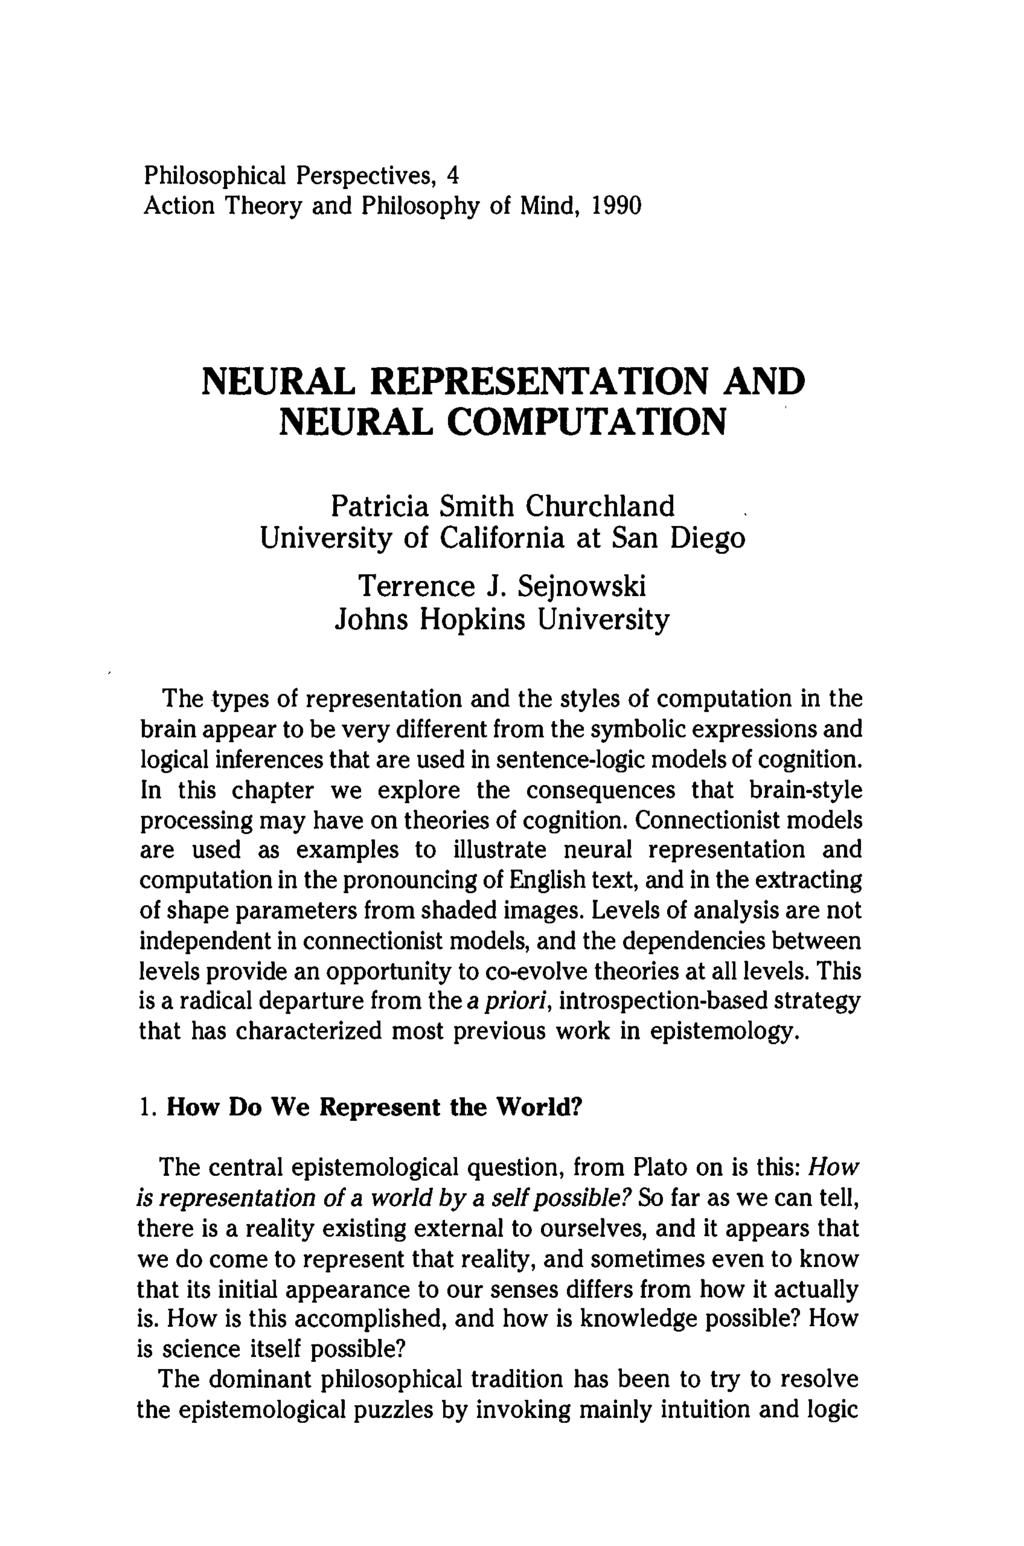 Philosophical Perspectives, 4 Action Theory and Philosophy of Mind, 1990 NEURAL REPRESENTATION AND NEURAL COMPUTATION Patricia Smith Churchland University of California at San Diego Terrence J.